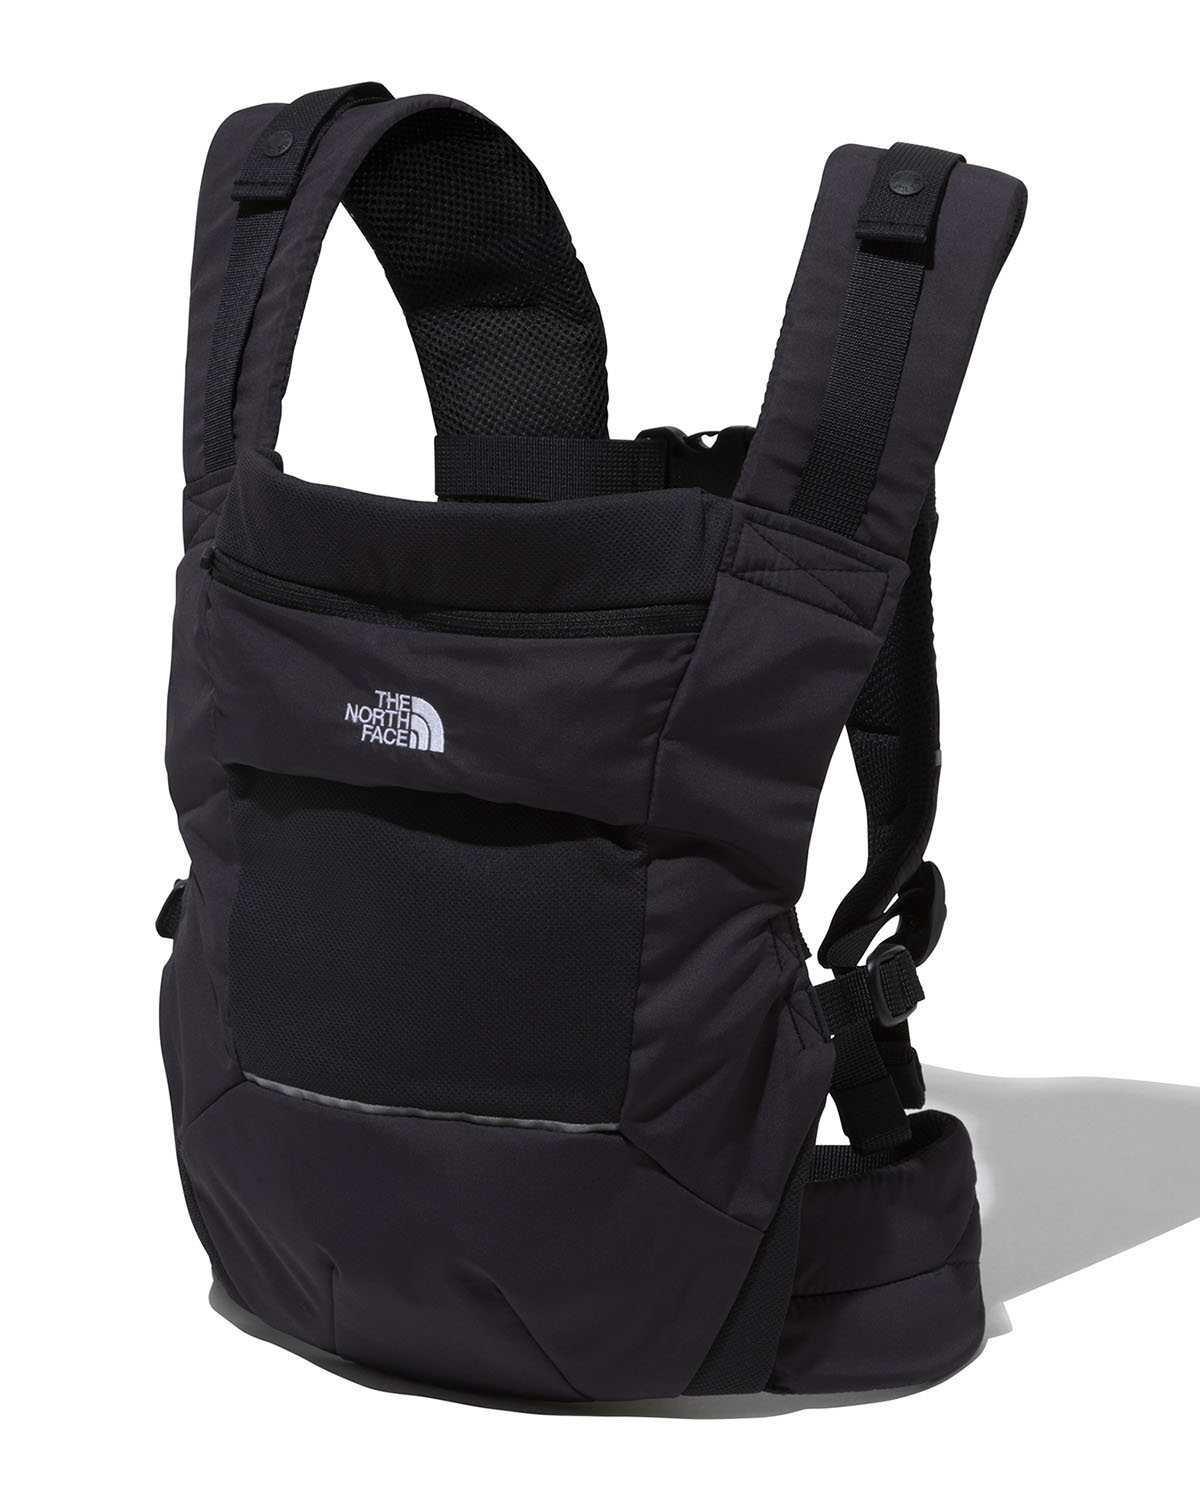 the-north-face-baby-carrier-03